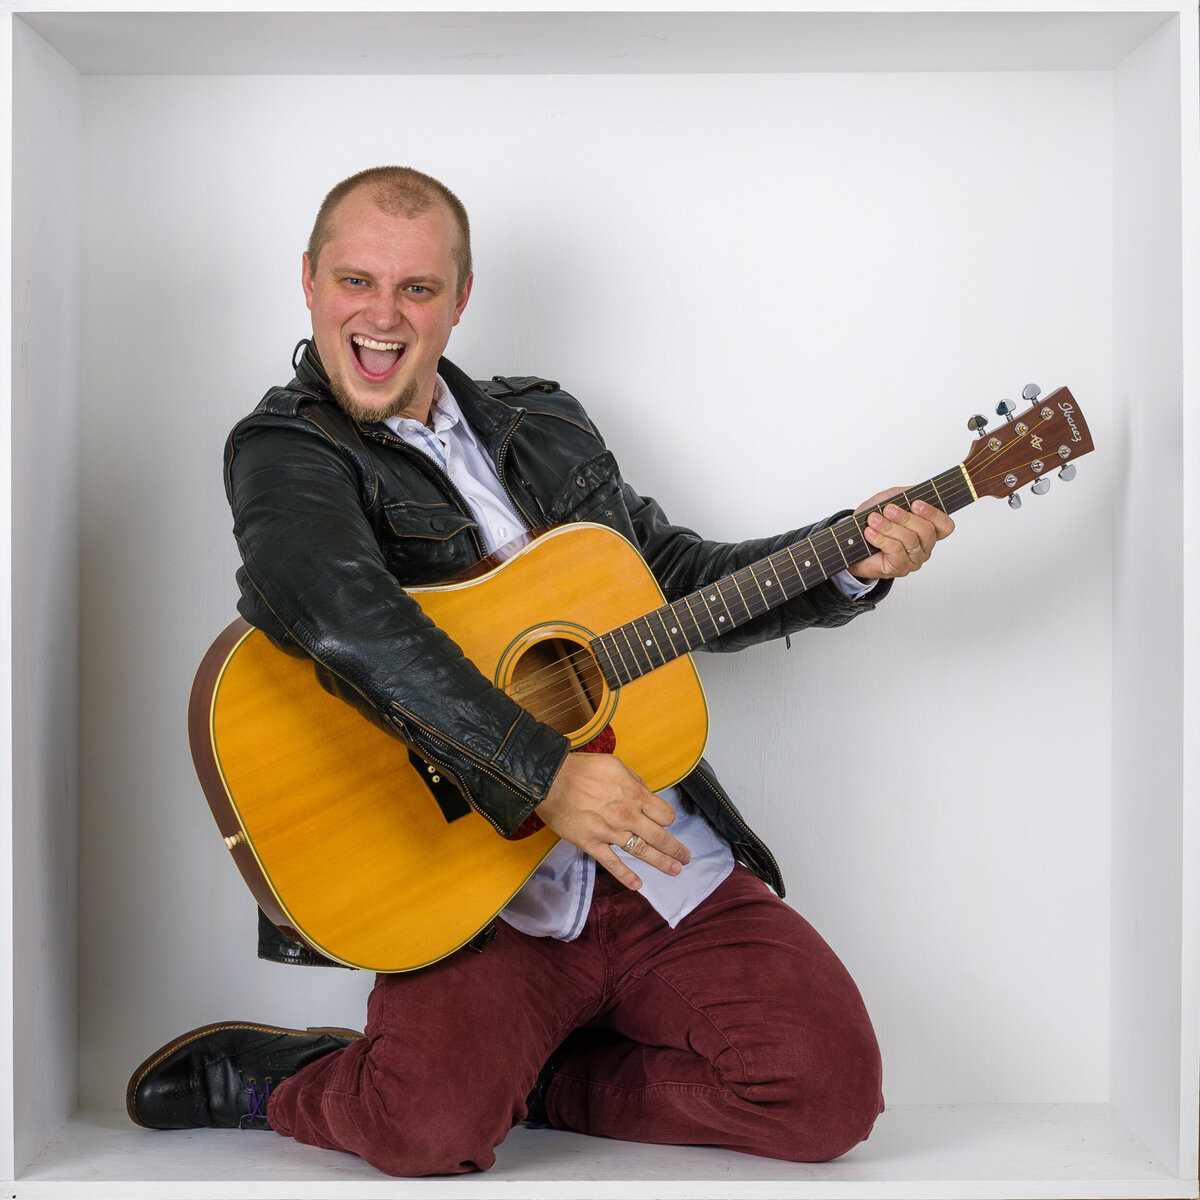 Headshot and branding photographer Travis from Fox & Brazen in  a white box with a guitar